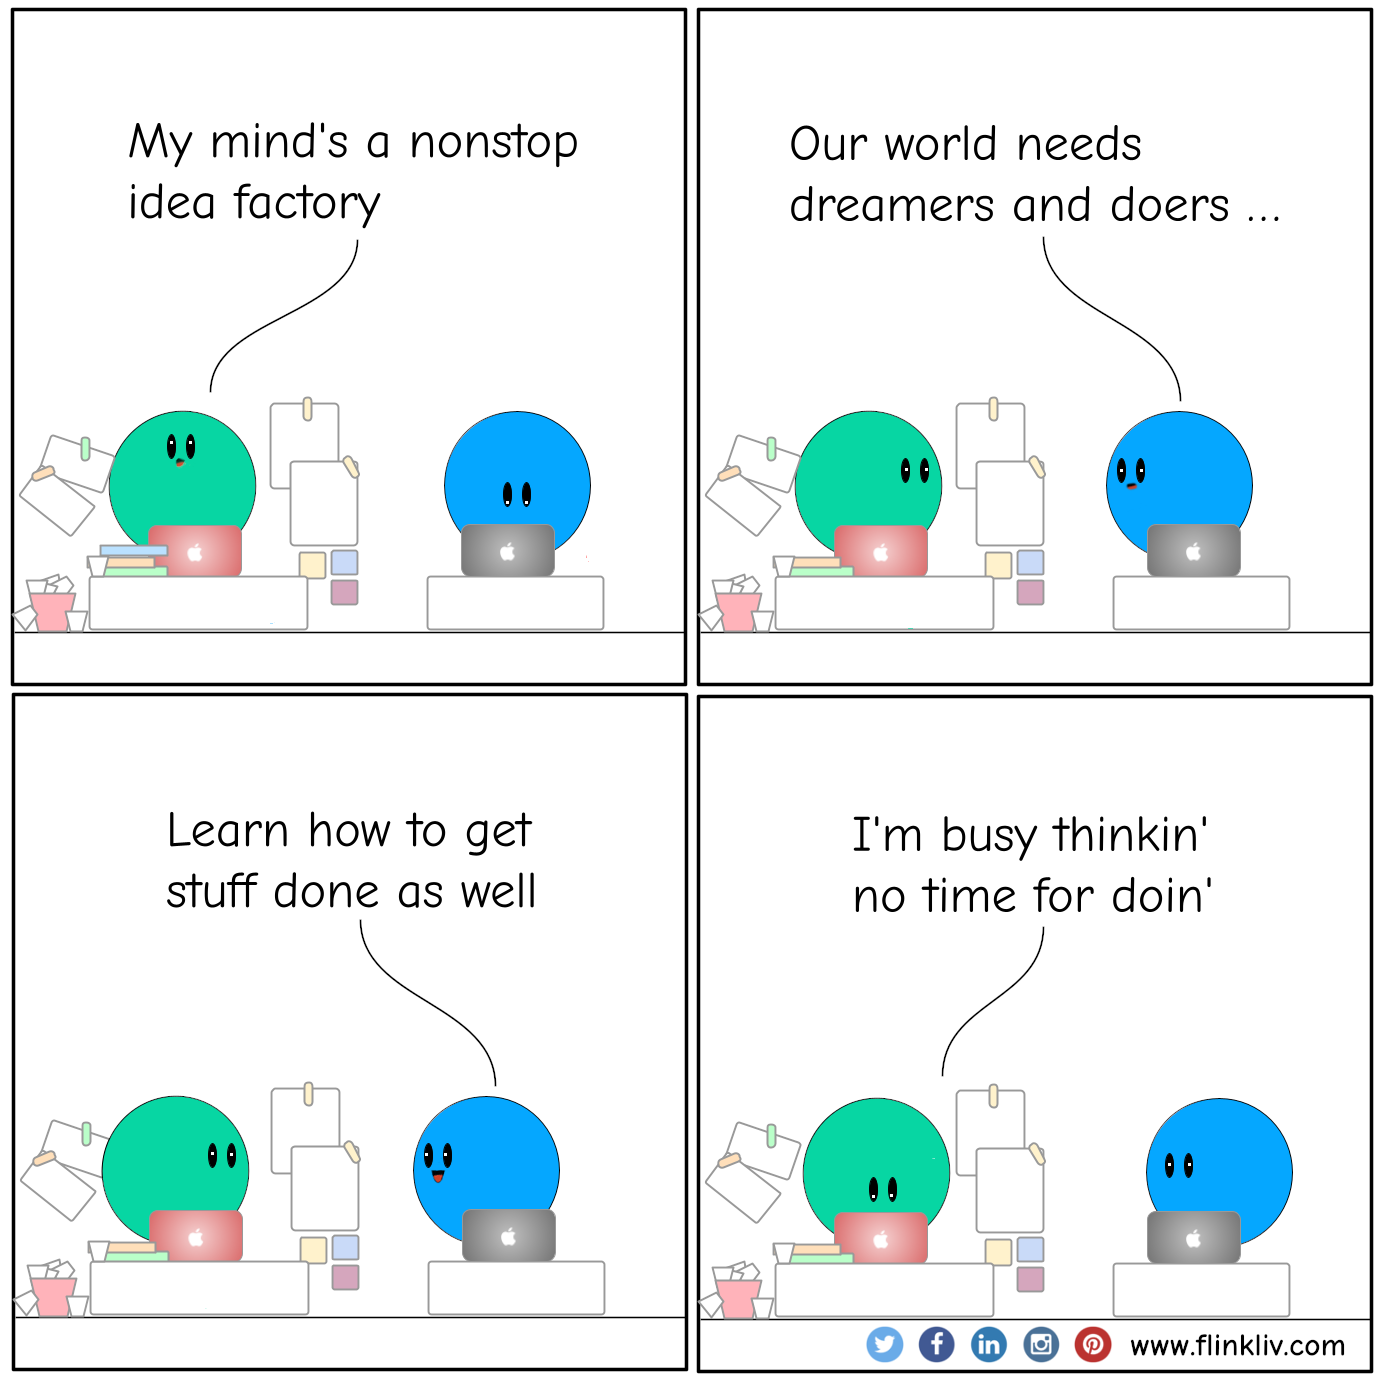 Conversation between A and B about our world needs dreamers and doers; learn how to get stuff done as well A: My mind's a nonstop idea factory B: Our world needs dreamers and doers; learn how to get stuff done as well A: I'm busy thinkin' no need for doing. By Flinkliv.com